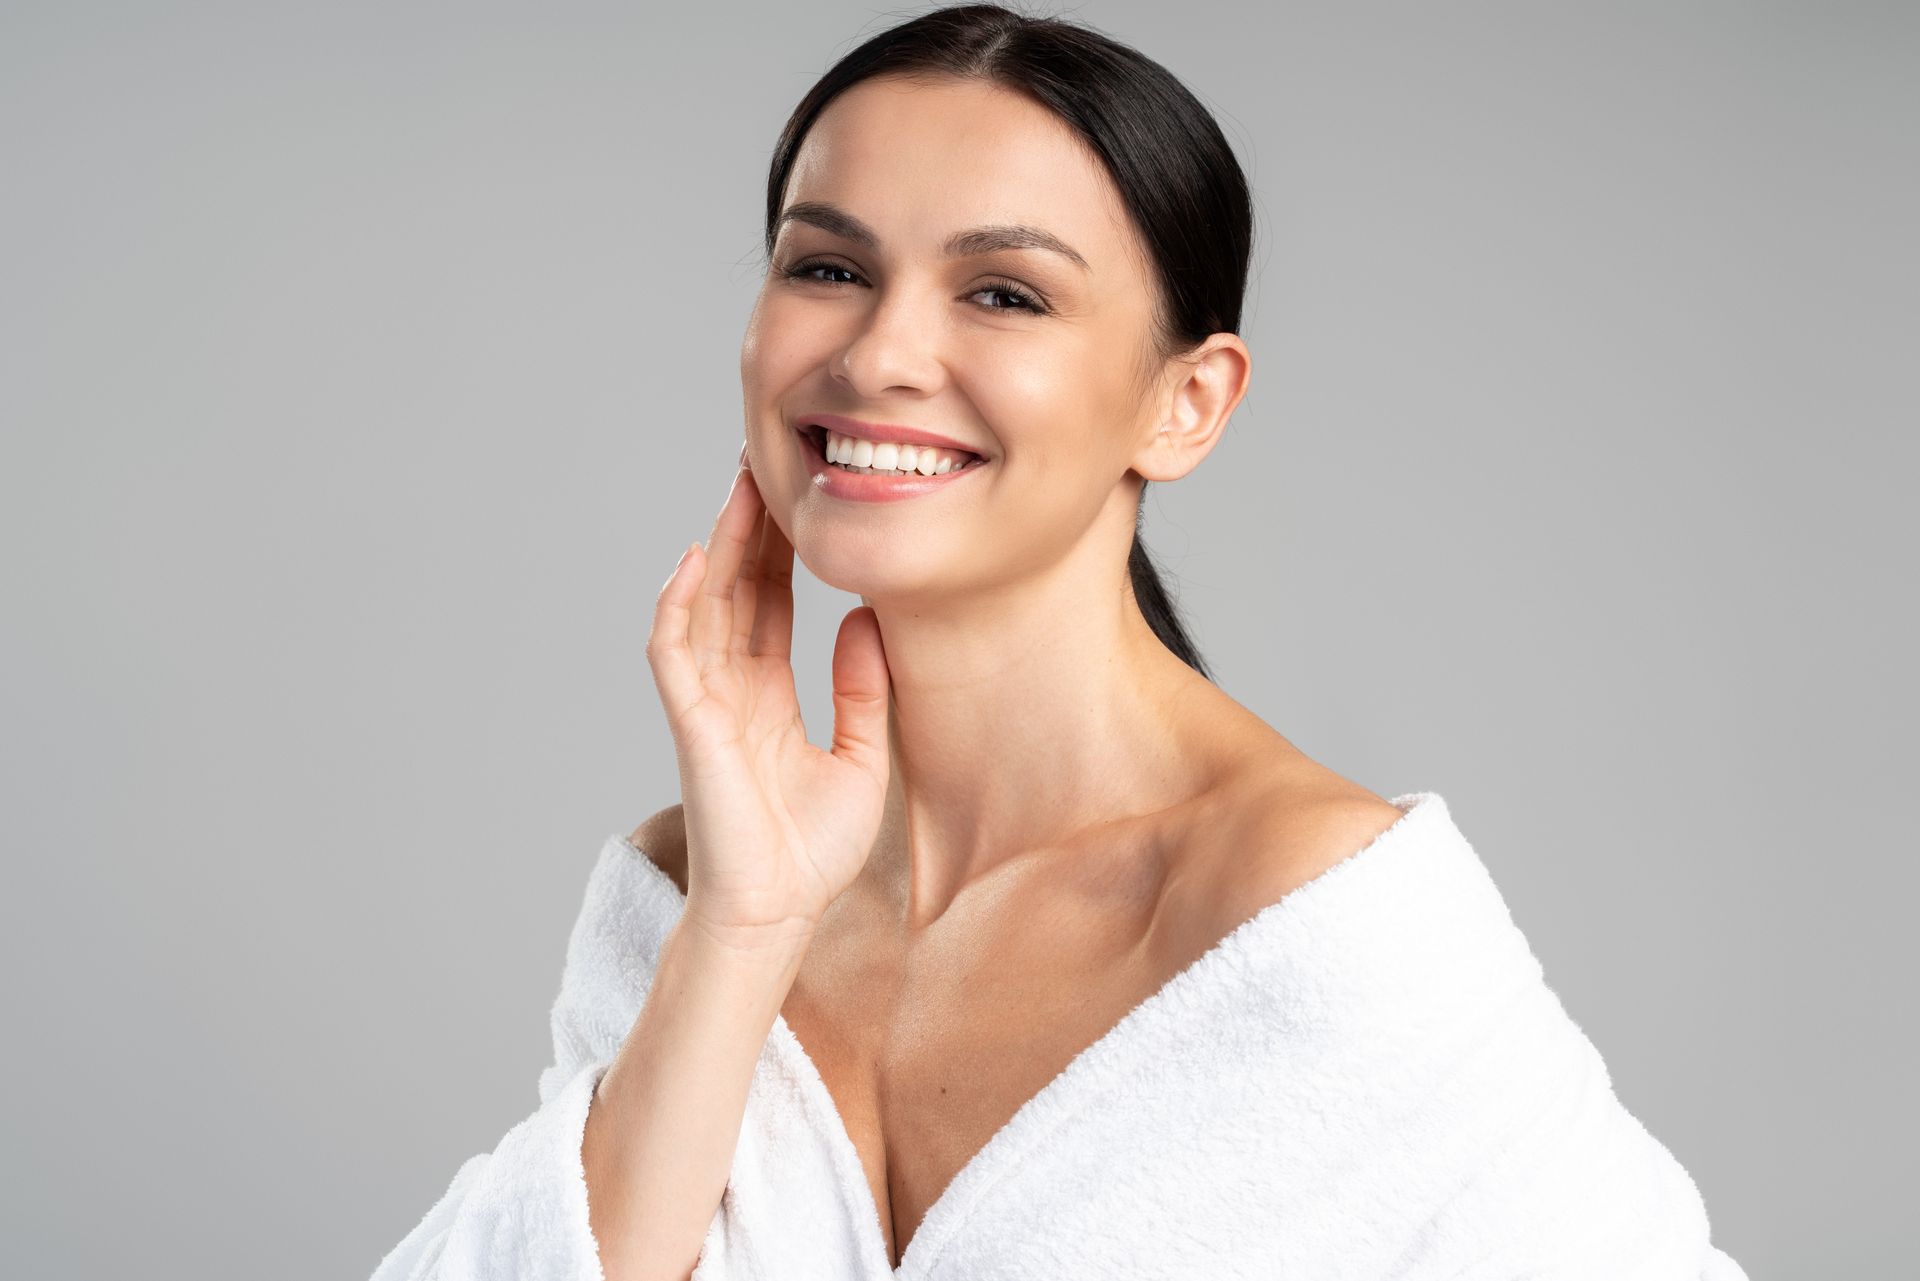 A woman in a white towel is smiling and touching her face.